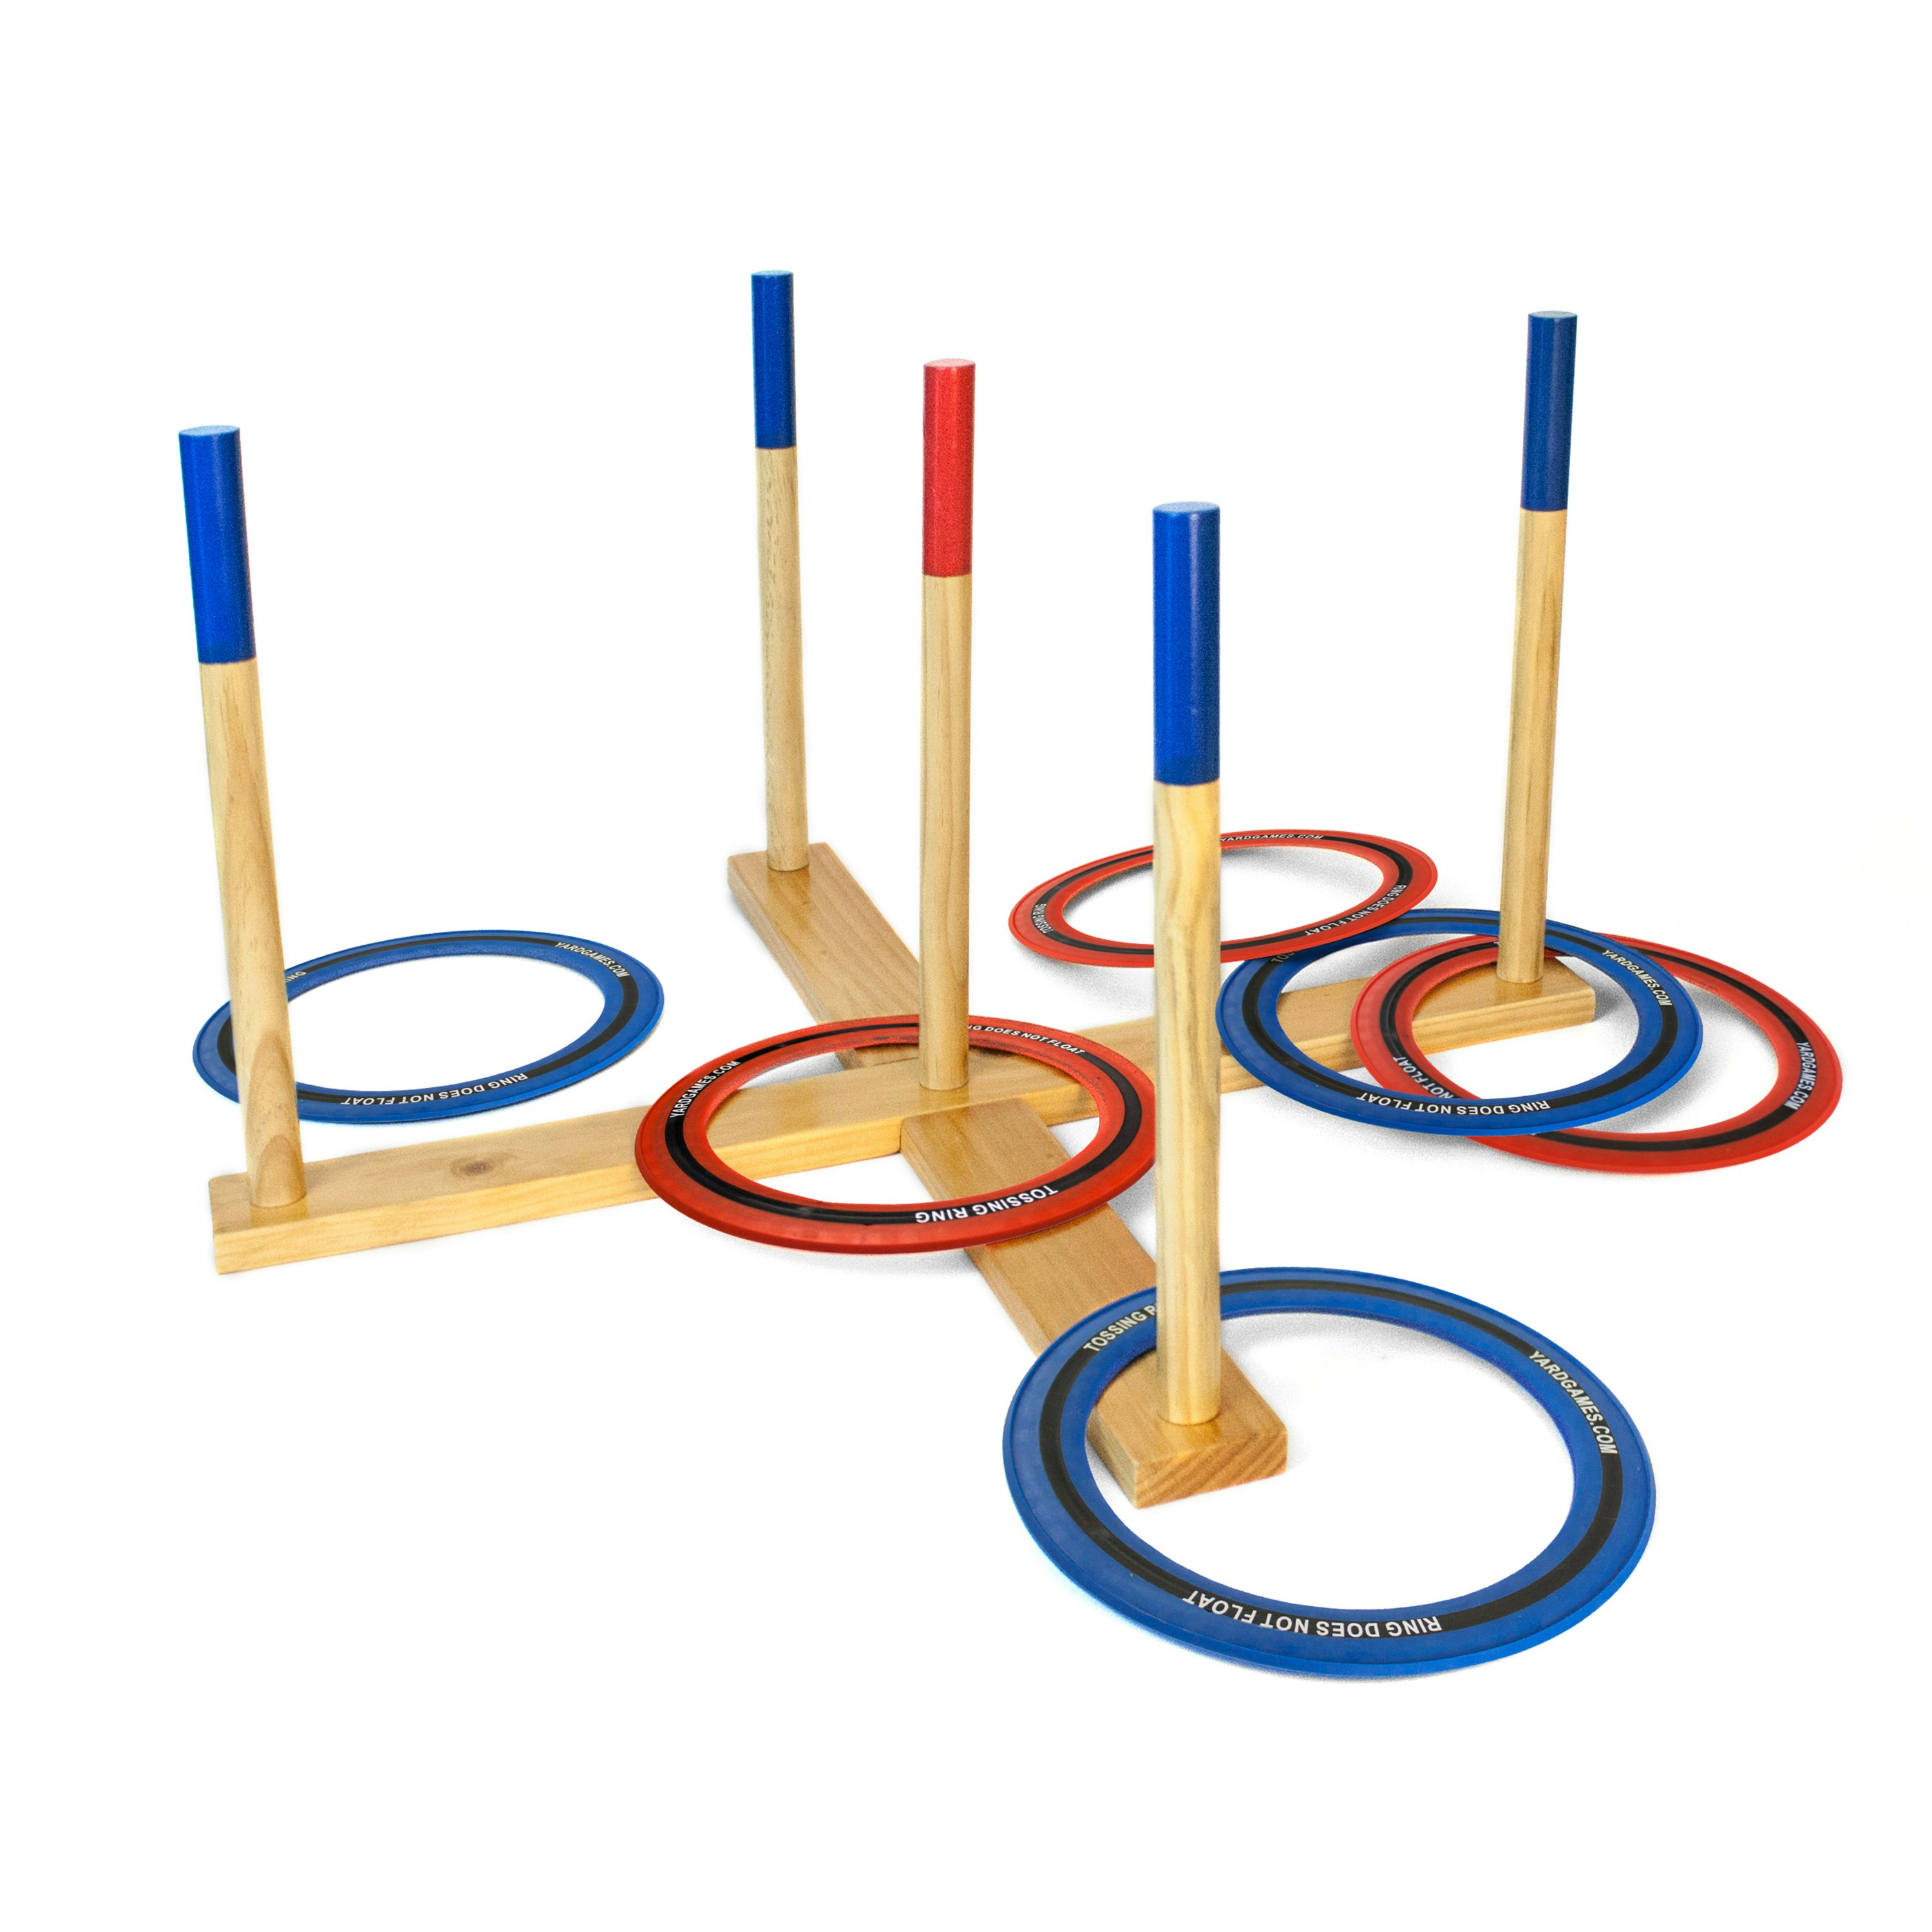 Yards of Fun Wooden Ring Toss Game for Kids. Family, Adults. 20 India | Ubuy